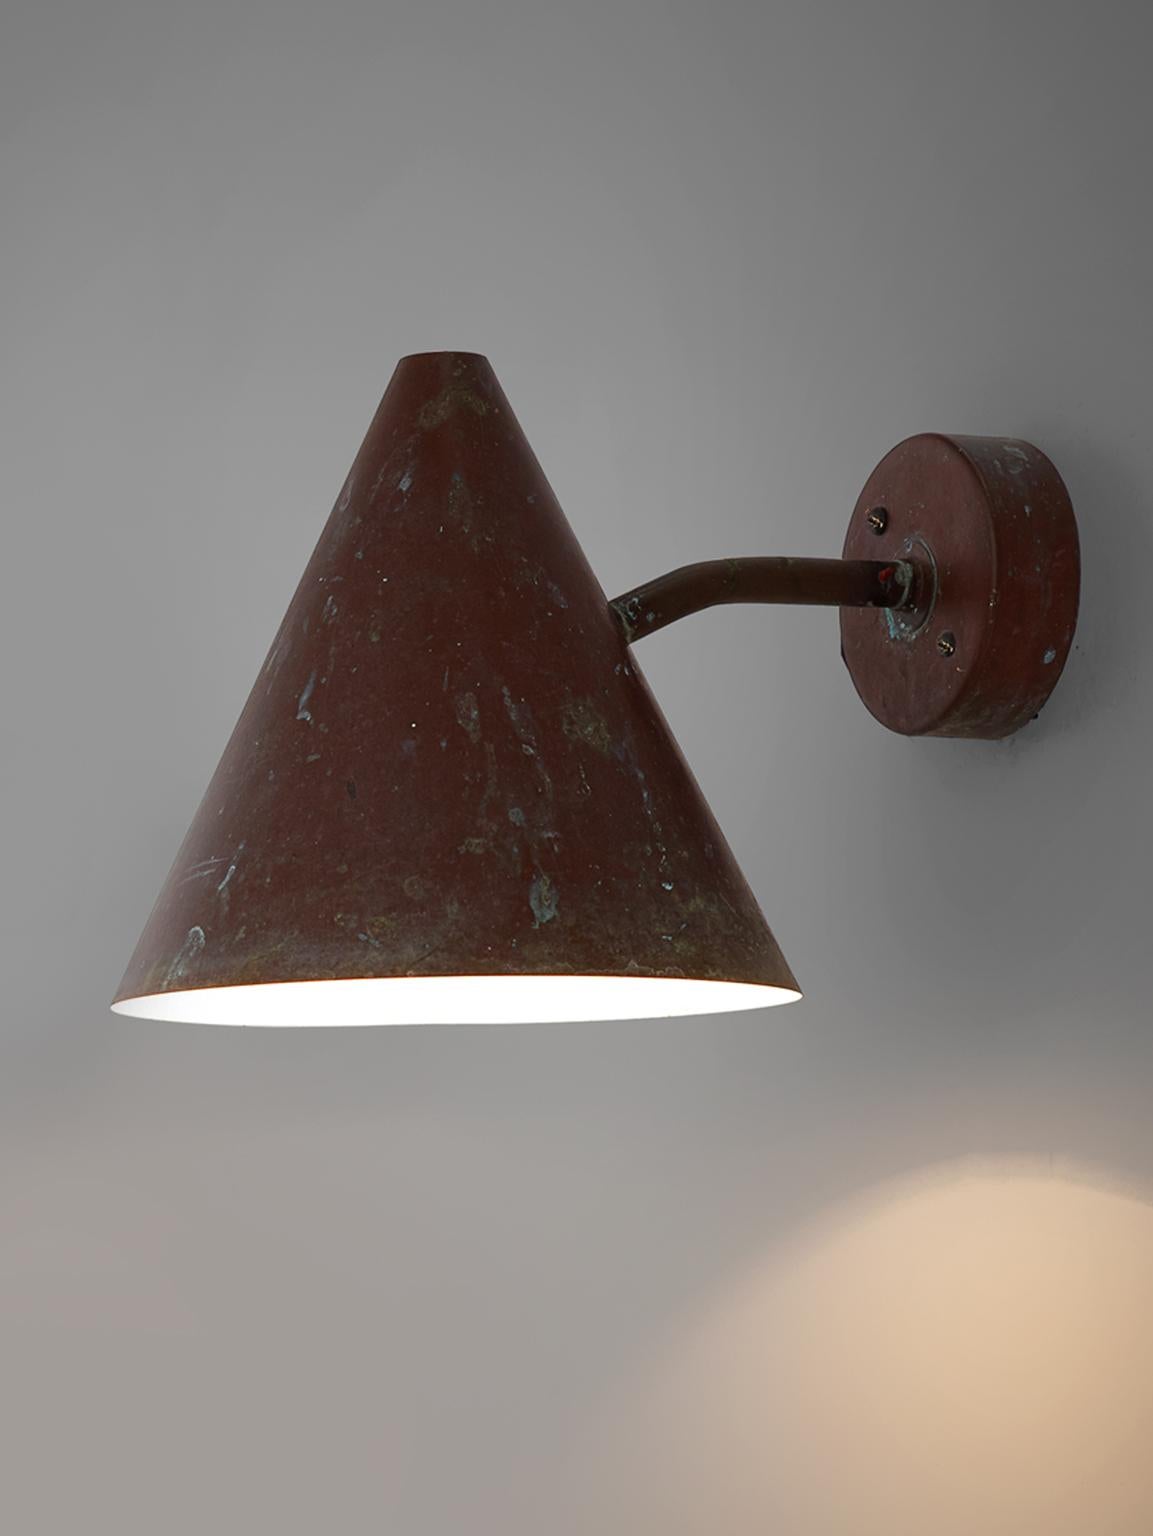 Hans-Agne Jakobsson for AB Markaryd, wall light, copper, by Sweden, 1950s. 

Cone-shaped wall light by Hans-Agne Jakobsson for AB Markaryd, in beautifully patinated copper with an off-white interior. The light this model shines creates a beautiful